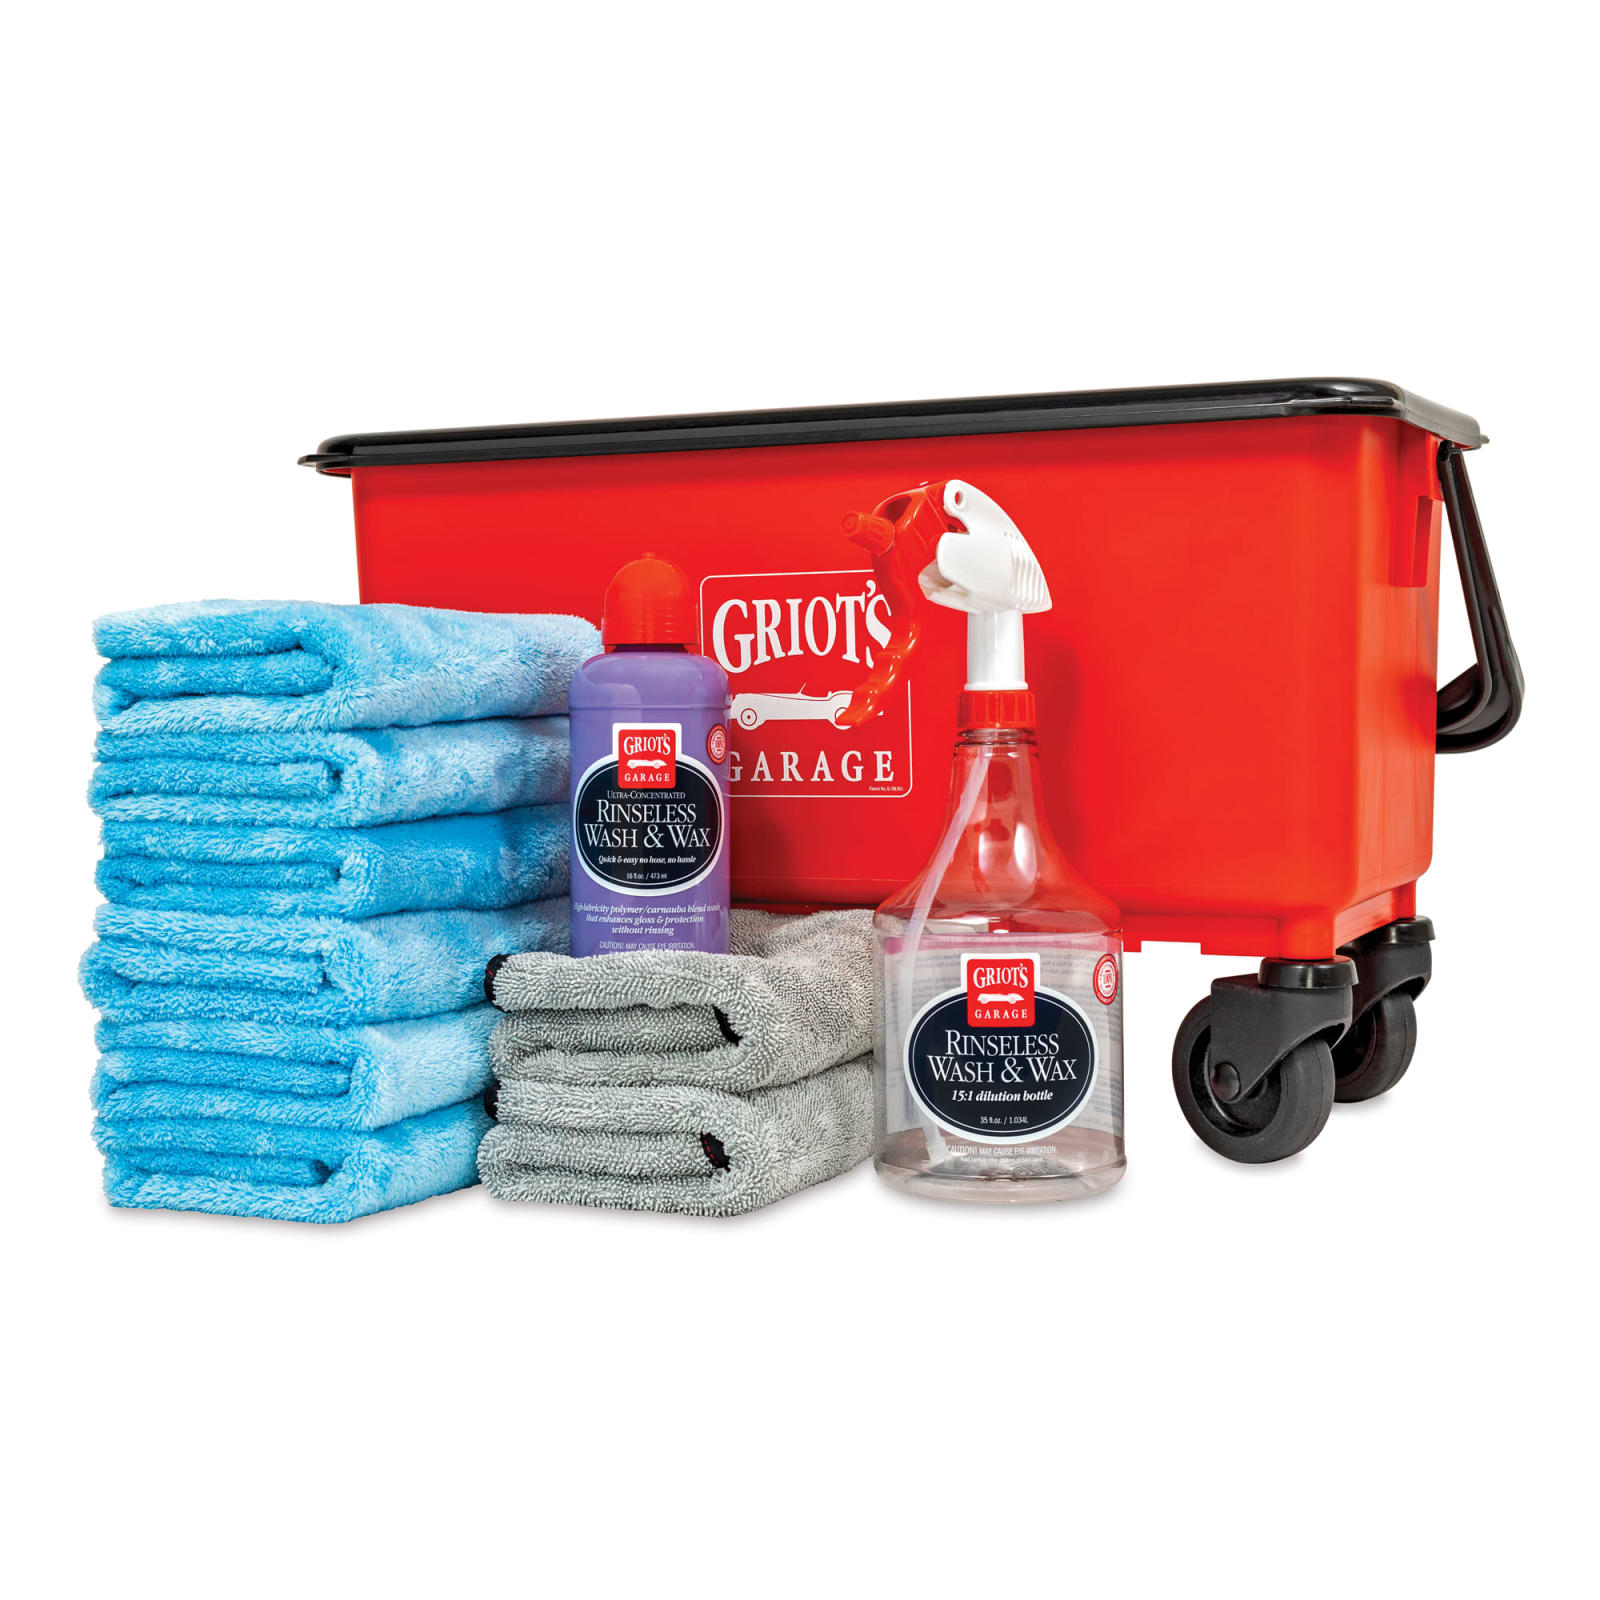 Griot's Garage Rinseless Wash & Wax Kit - with Bucket